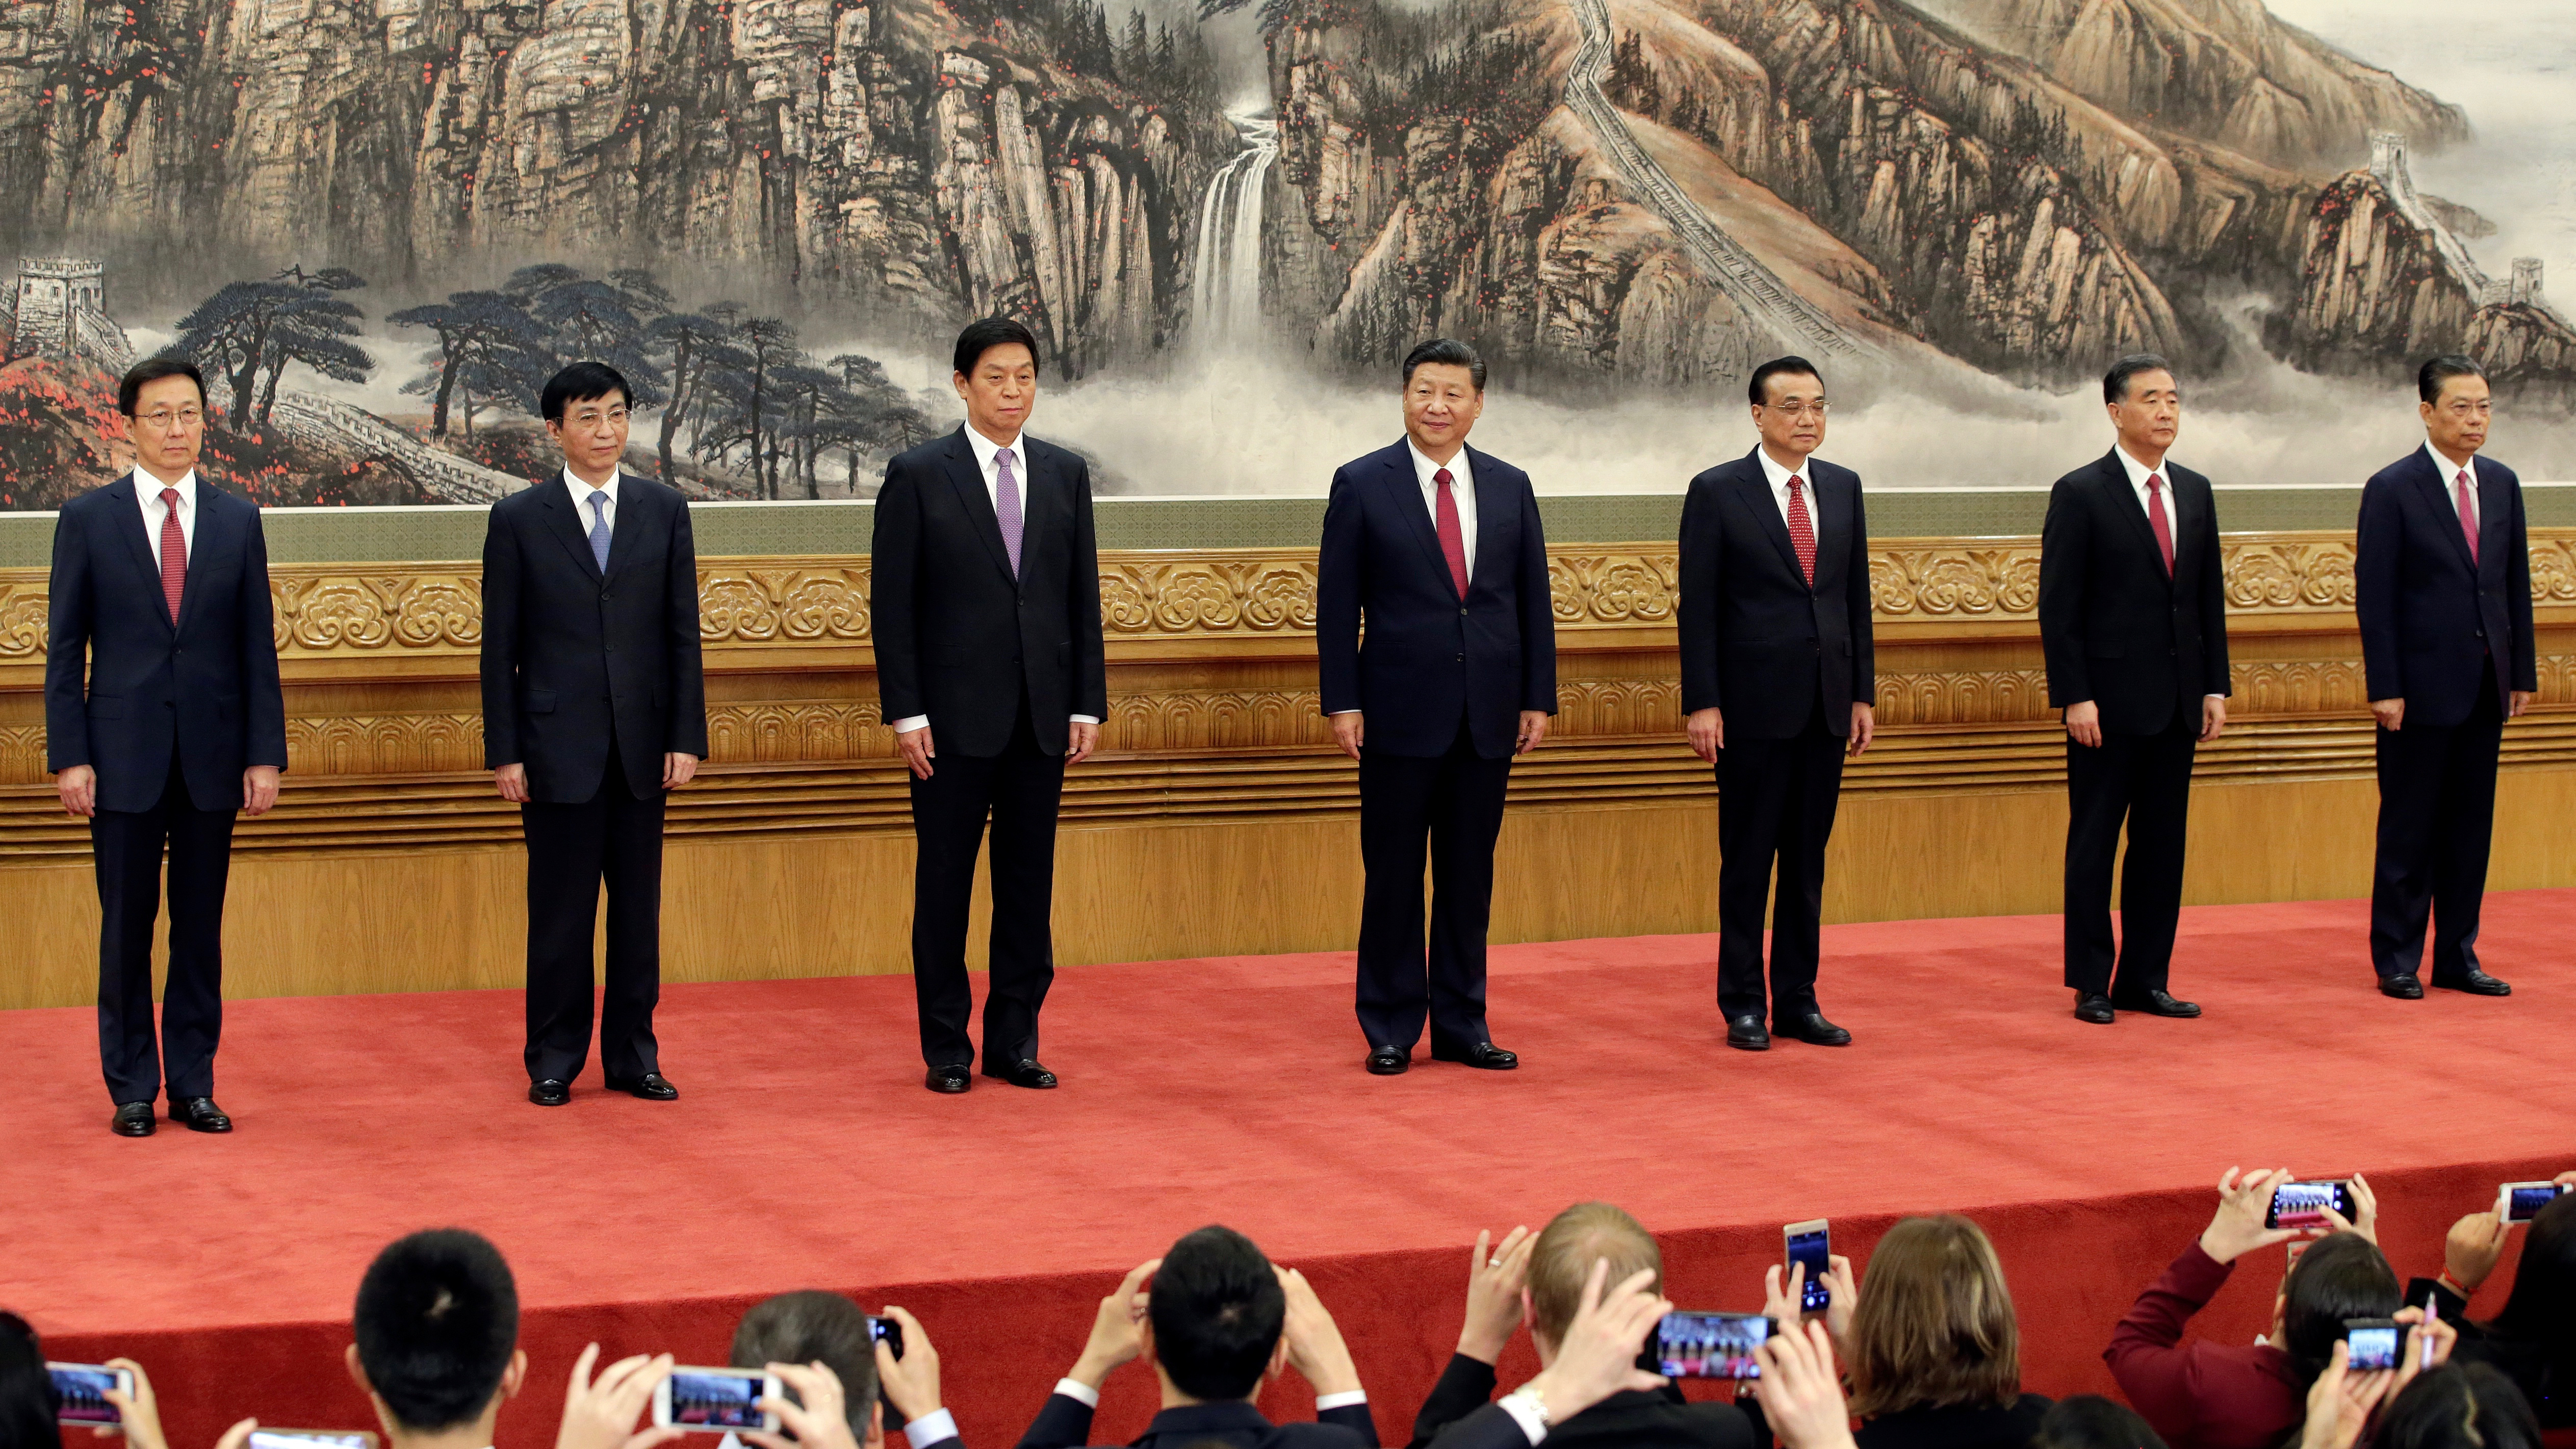 When it comes to running China, the most powerful officials in government are probably the members of the Politburo Standing Committee, lining up here for the news media at the Great Hall of the People in Beijing on October 25, 2017. But the man with the 